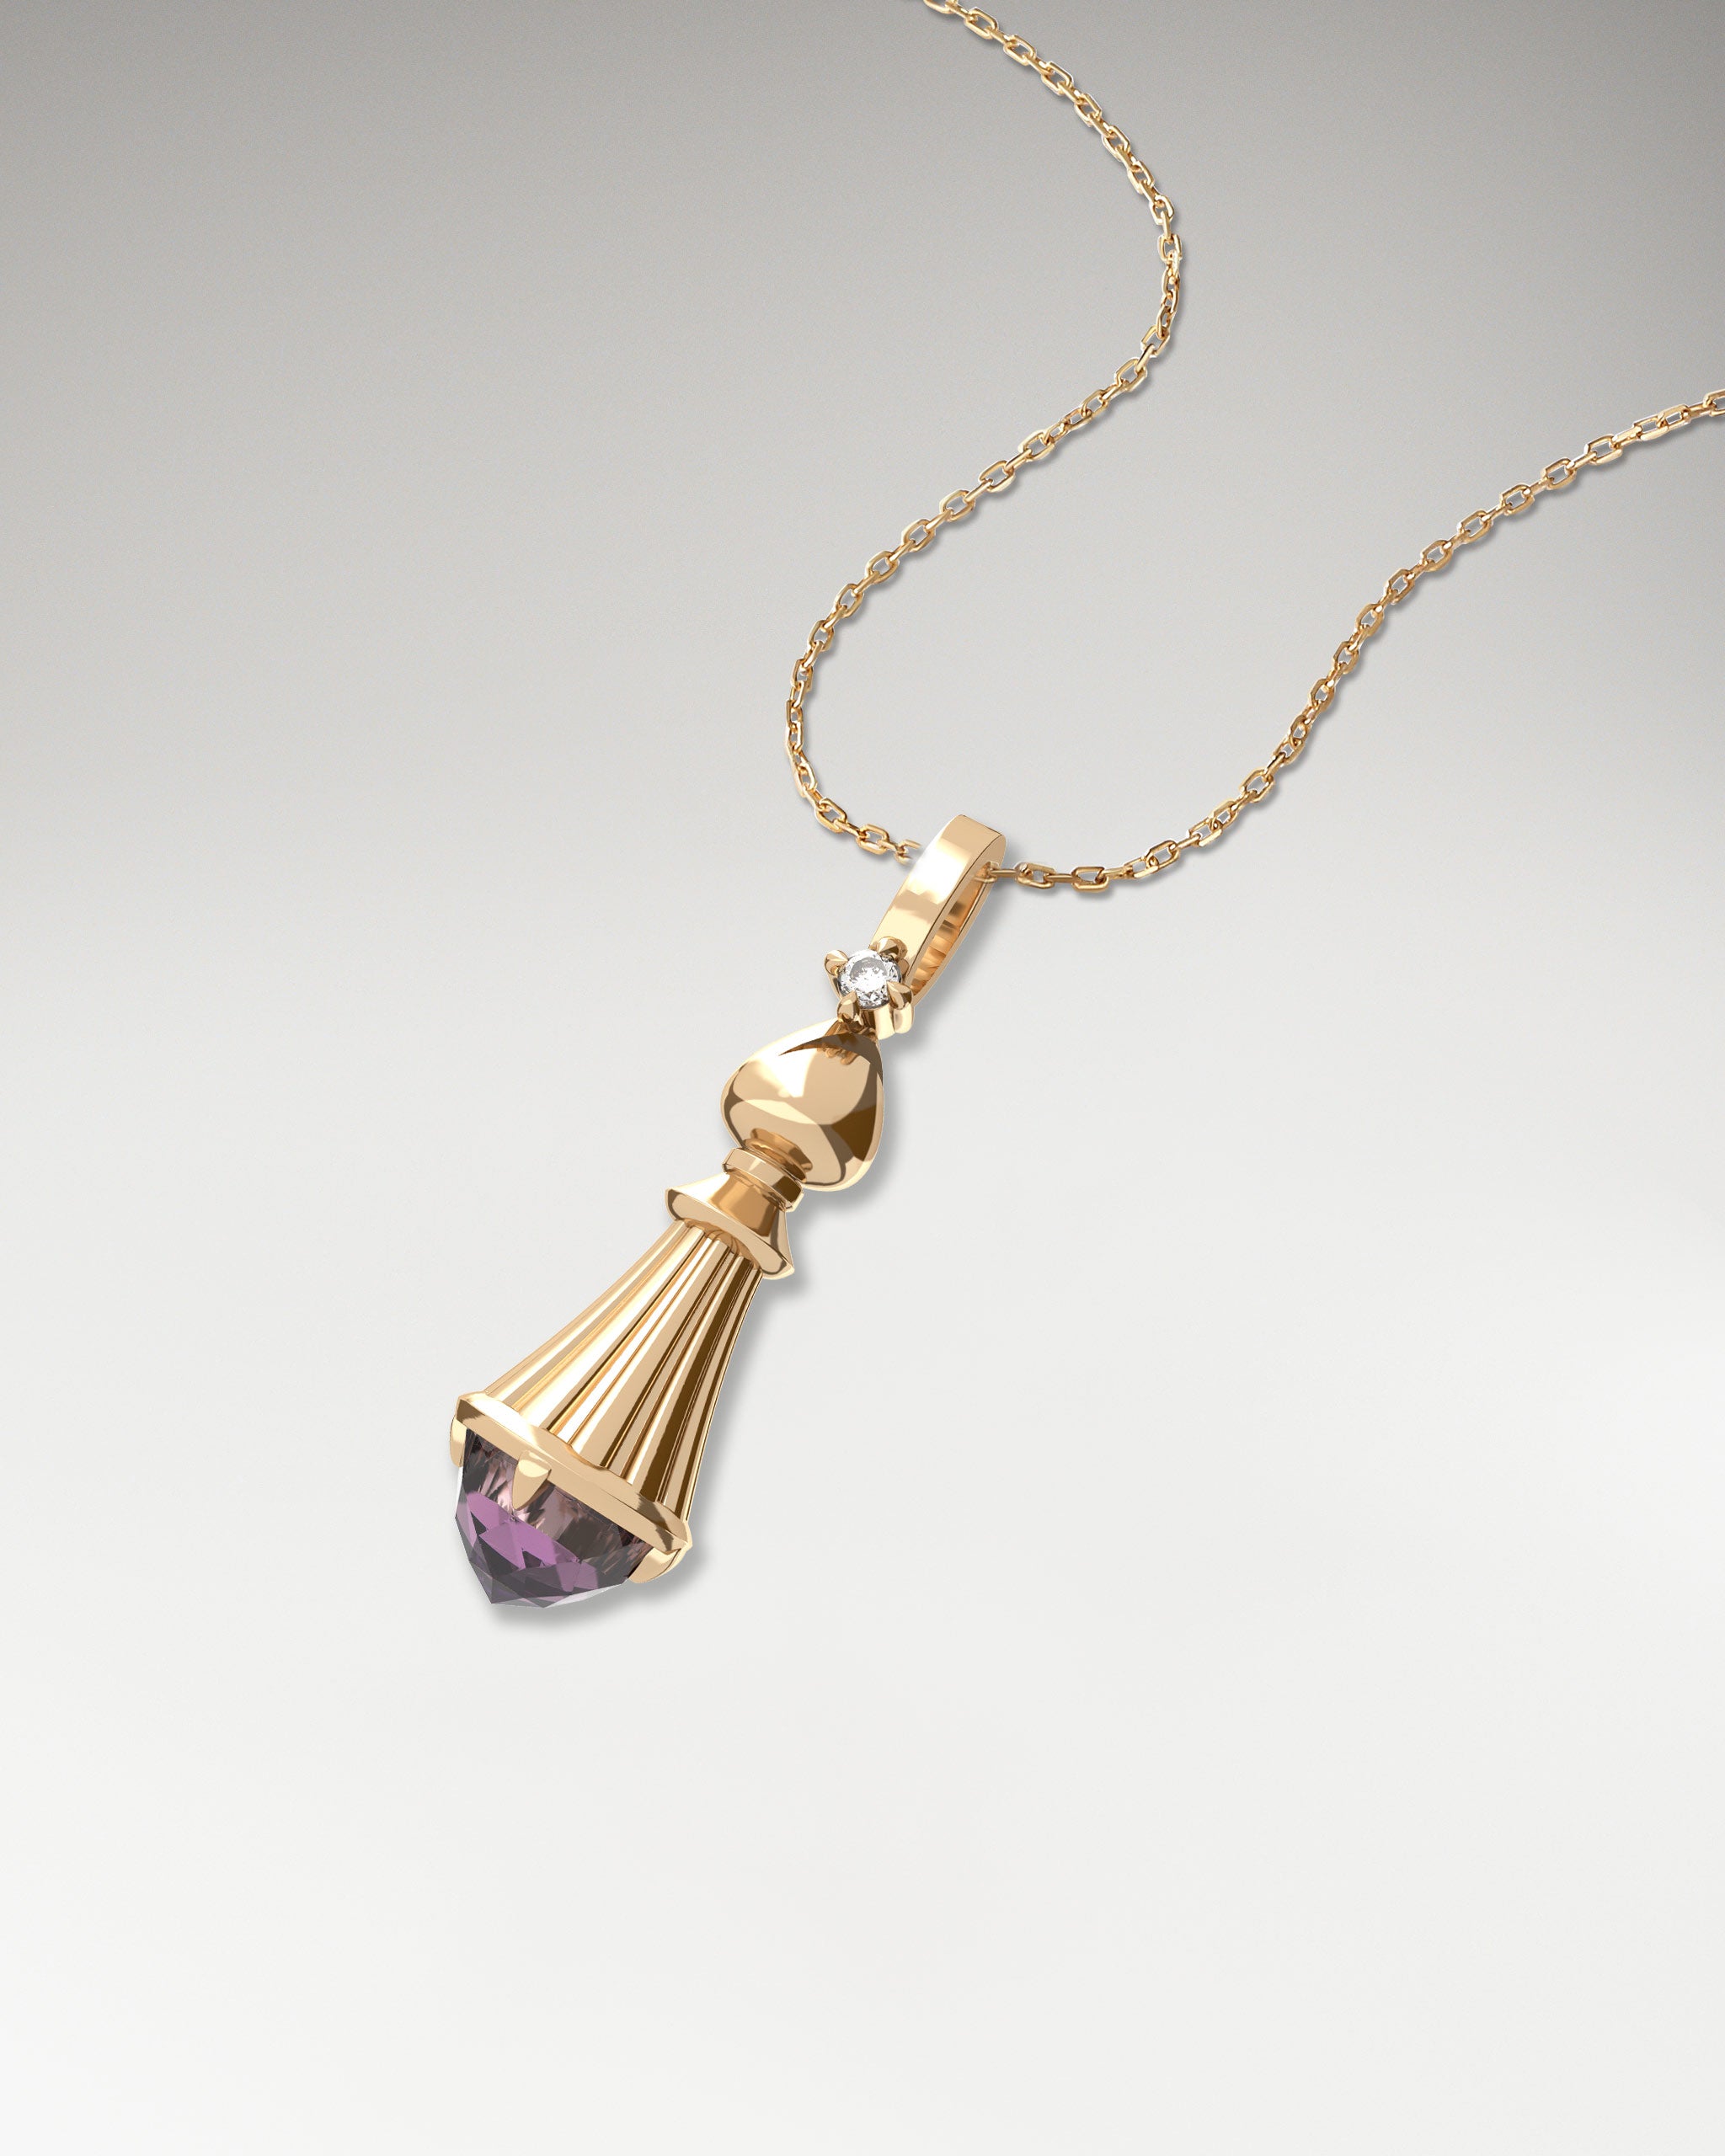 Bishop necklace in gold with diamond and spinel